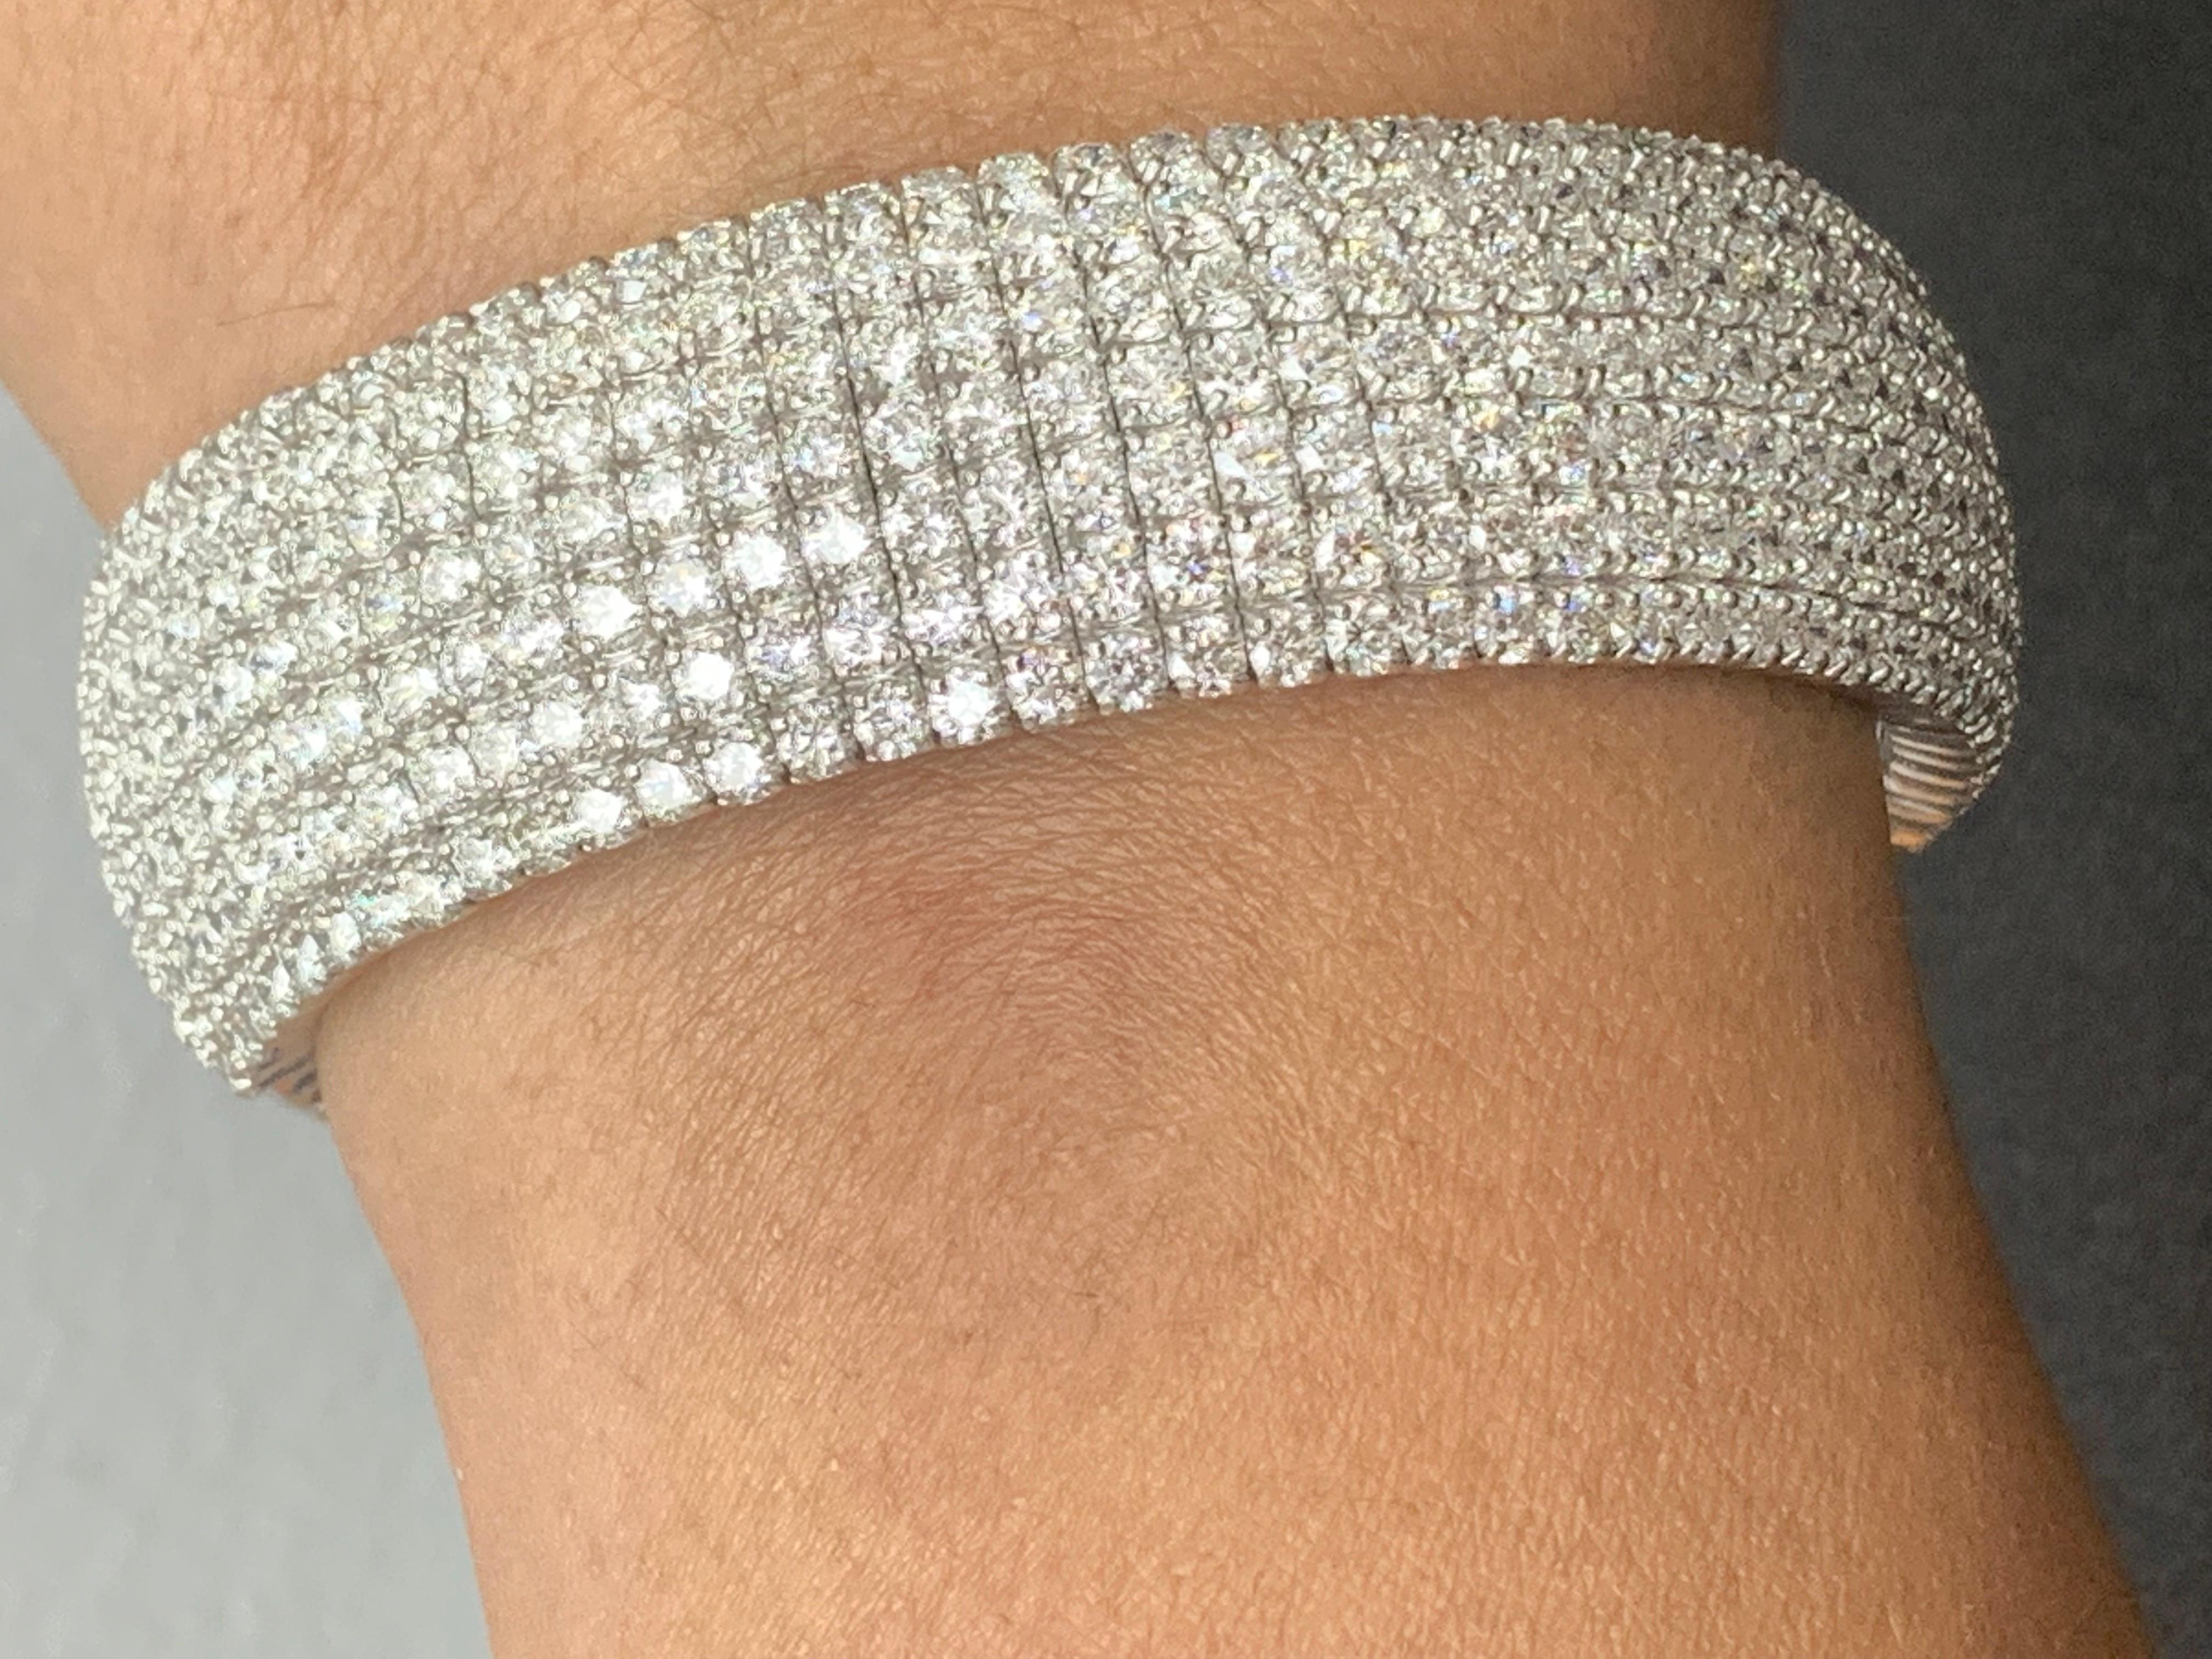 Breathtaking 14K White Gold Bracelet in a unique Cuff-Style with 7 Rows of 287 Brilliant Cut Round Diamonds totaling 15.11 carats. 

All diamonds are GH color SI1 Clarity.
Available in Yellow and White Gold. 
Style is available in different price